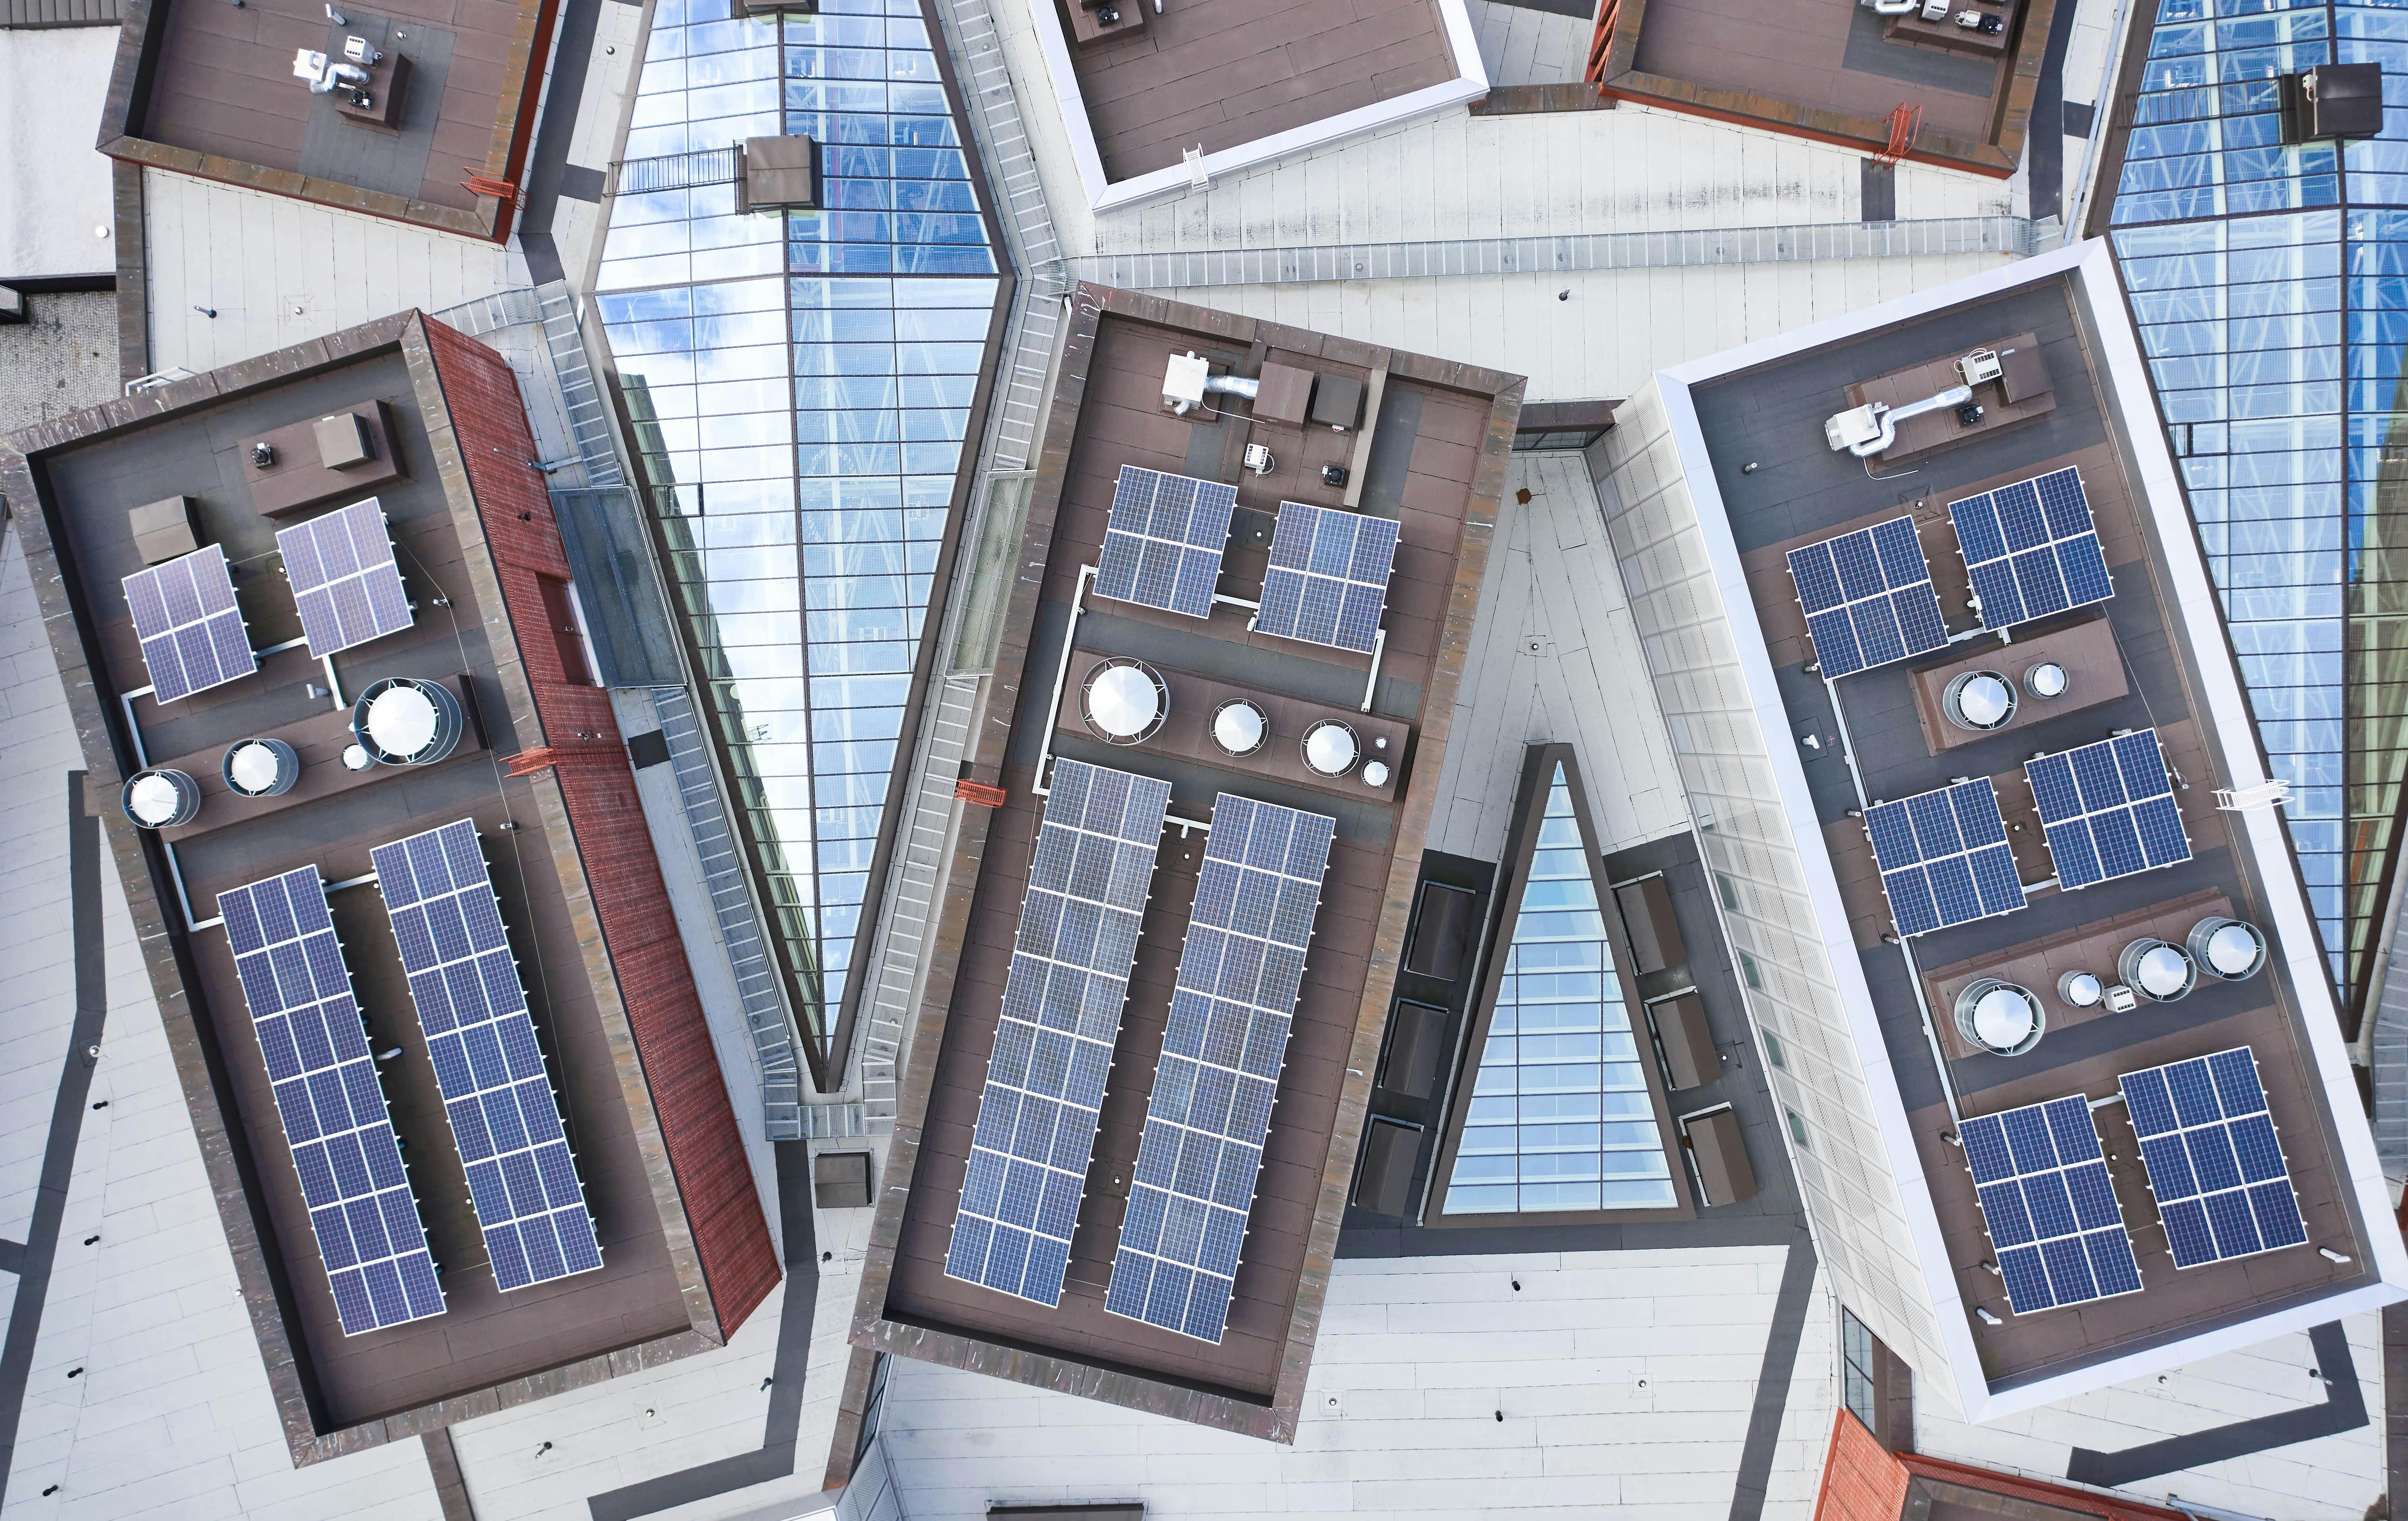 Aerial view of buildings with solar panels on roof